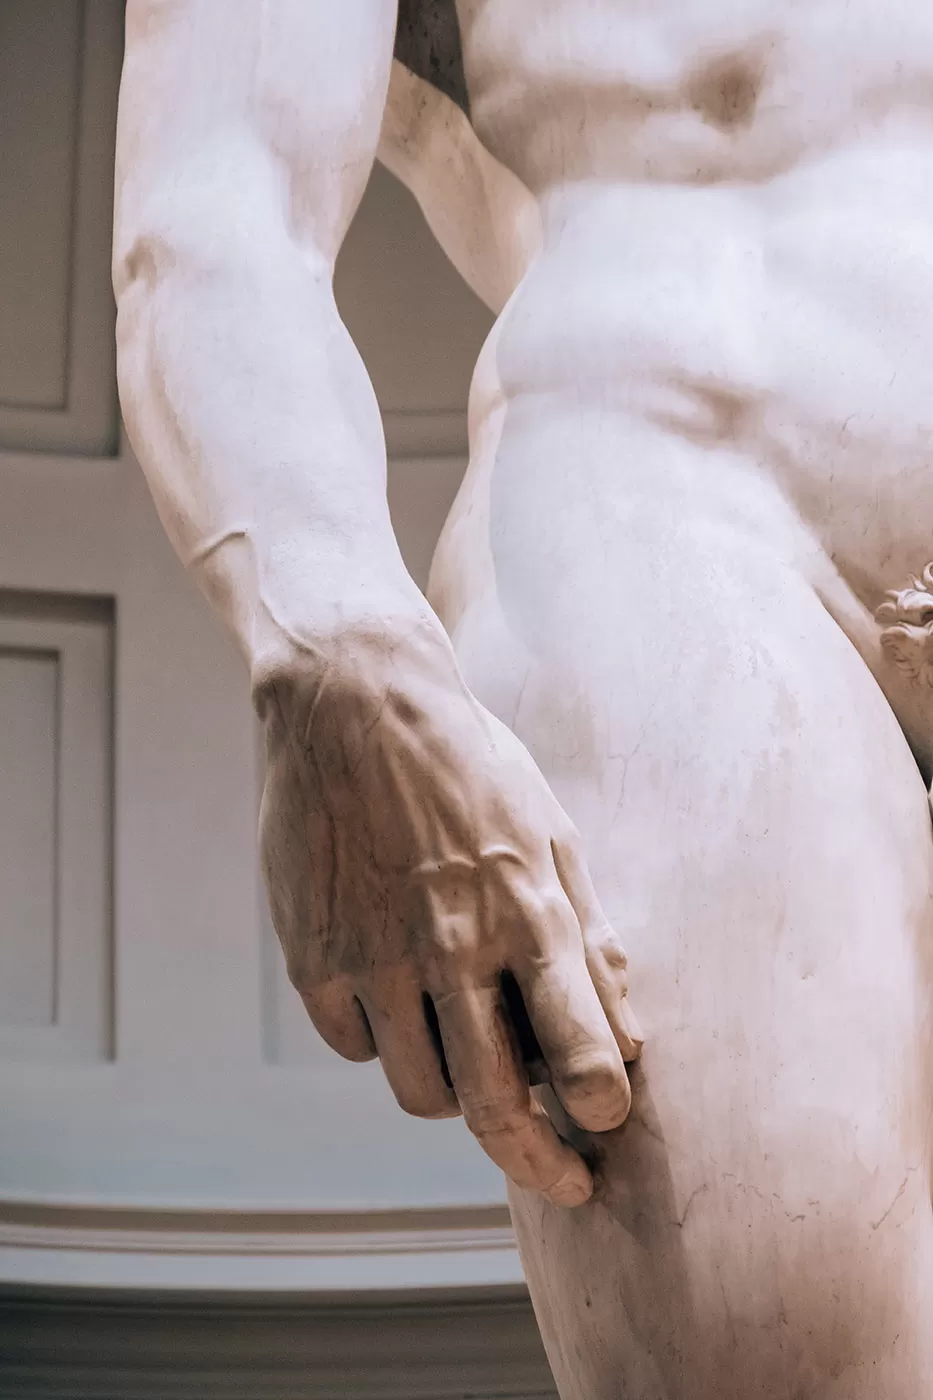 Florence tips - Galleria dell'Accademia - David's hand